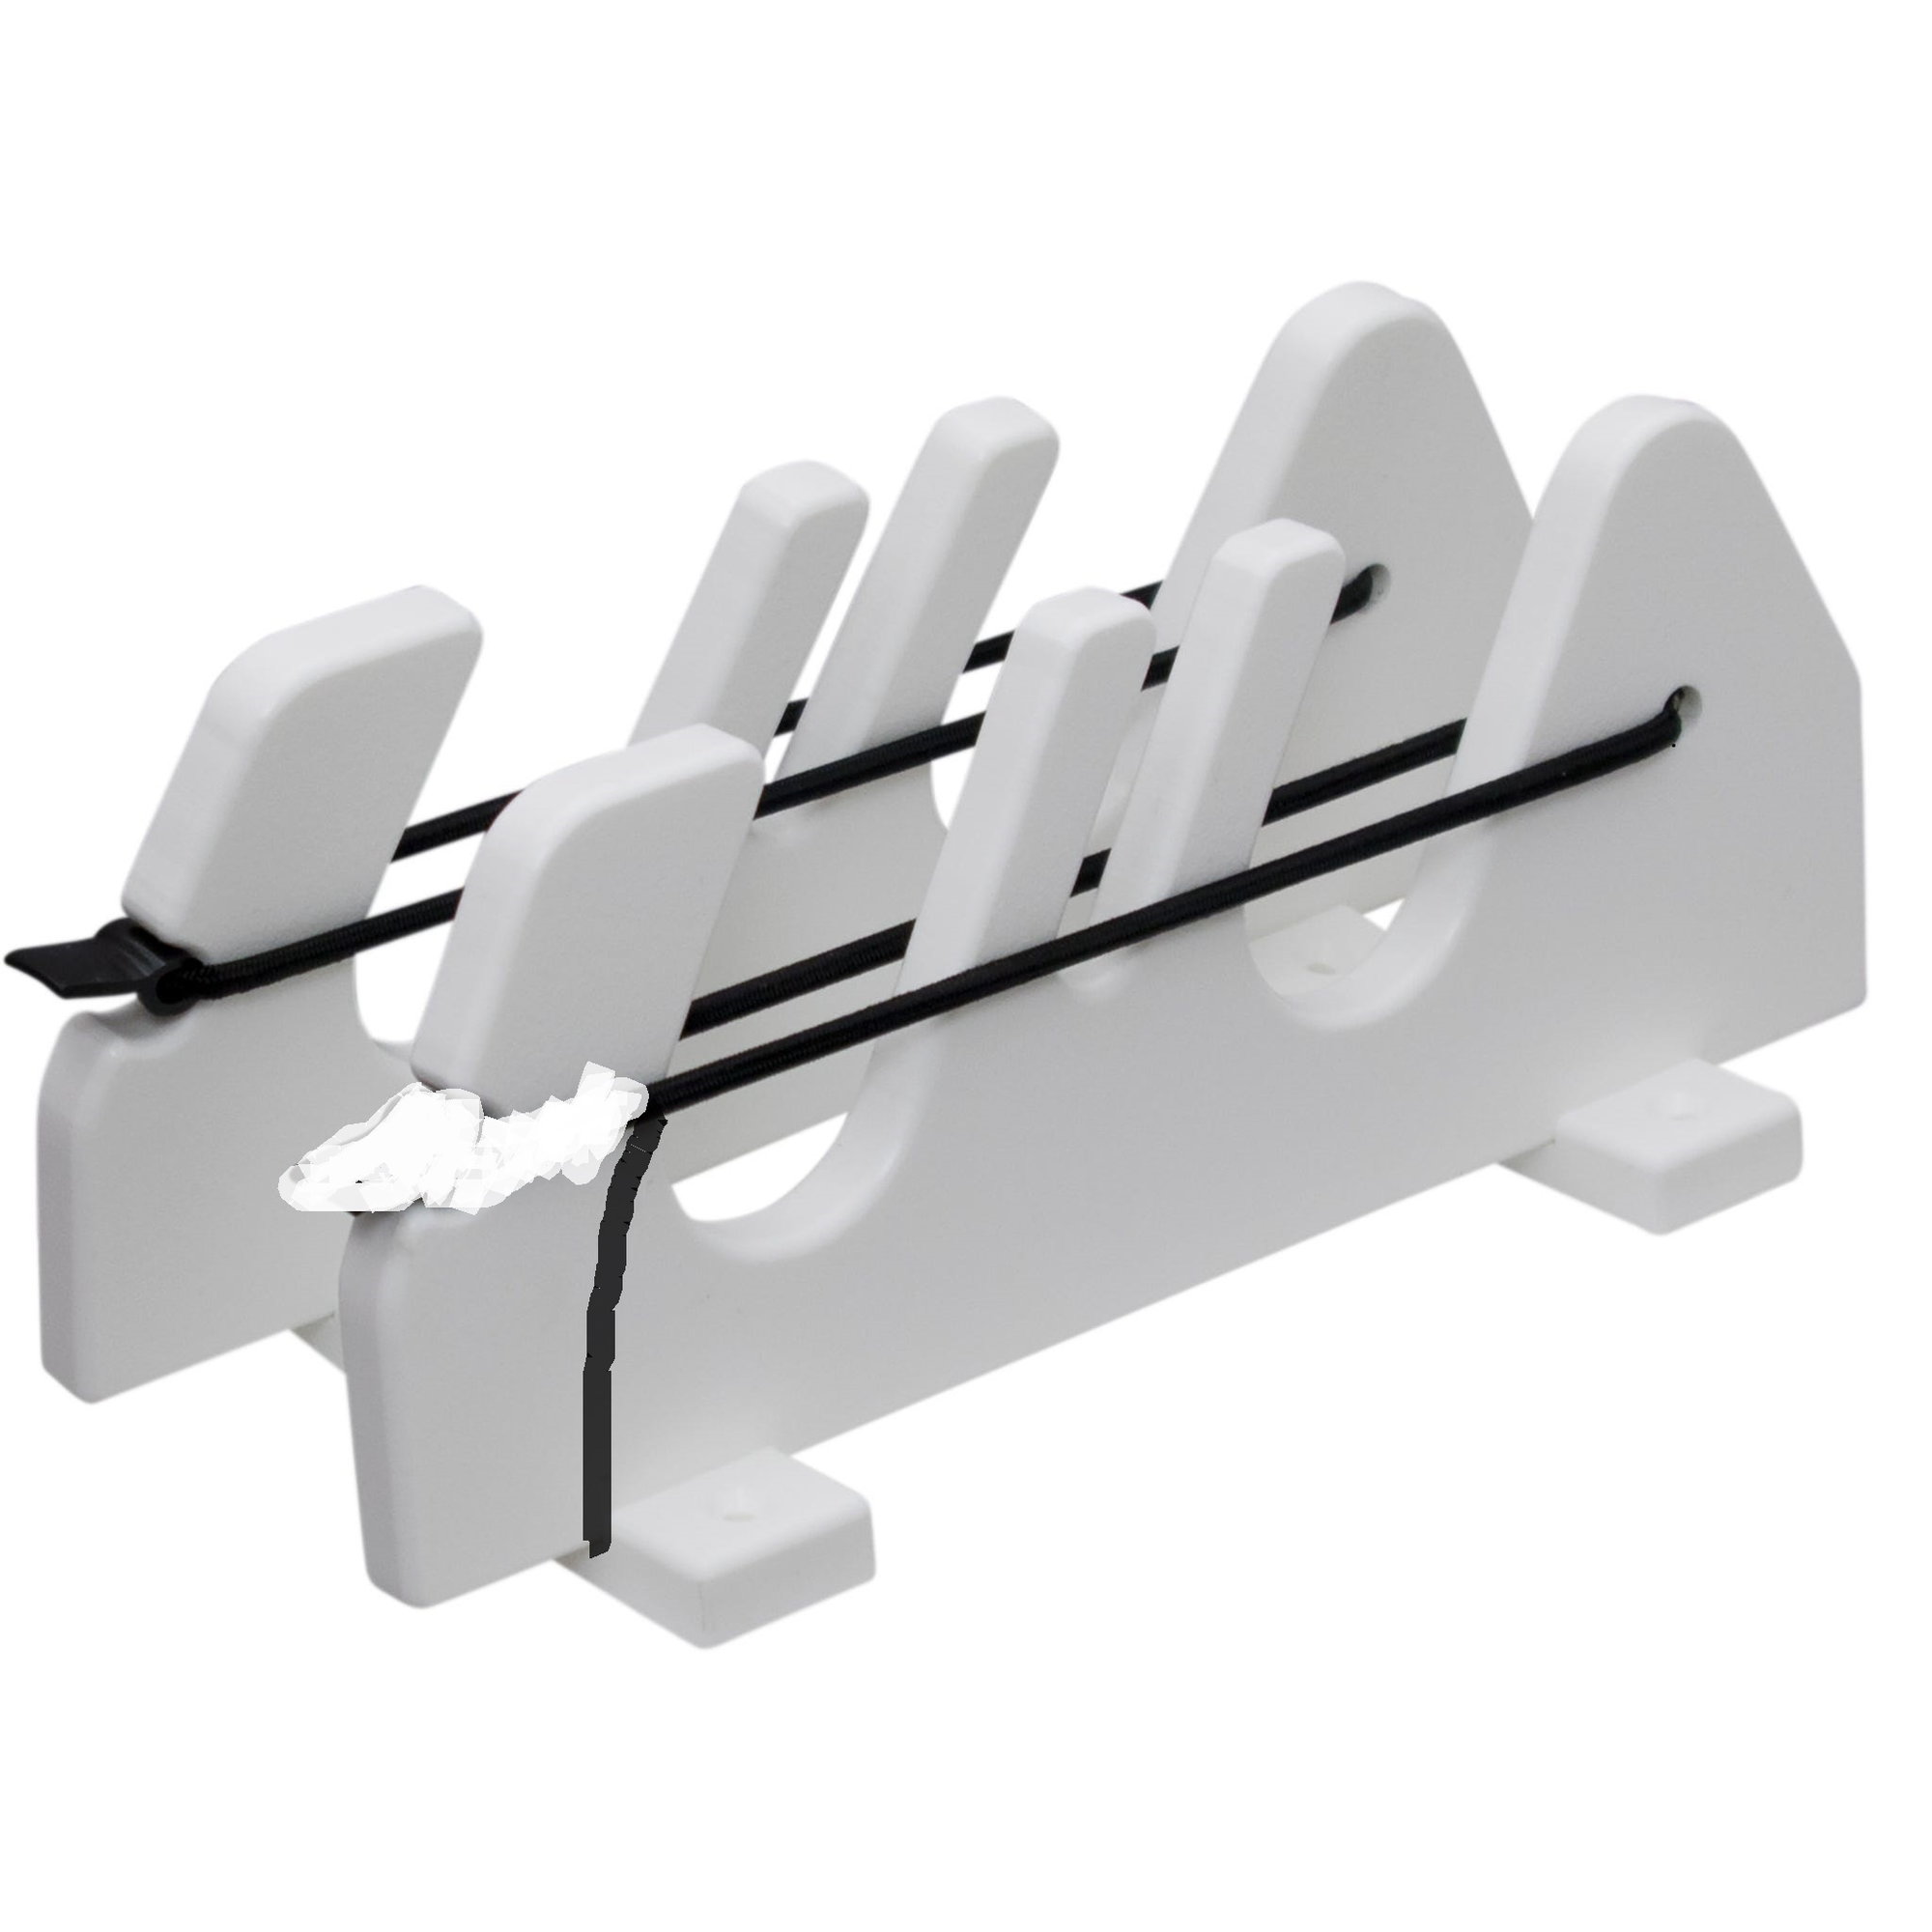 Vertical Boat Rod Holder - Console or Wall - 3 Rods Bungee